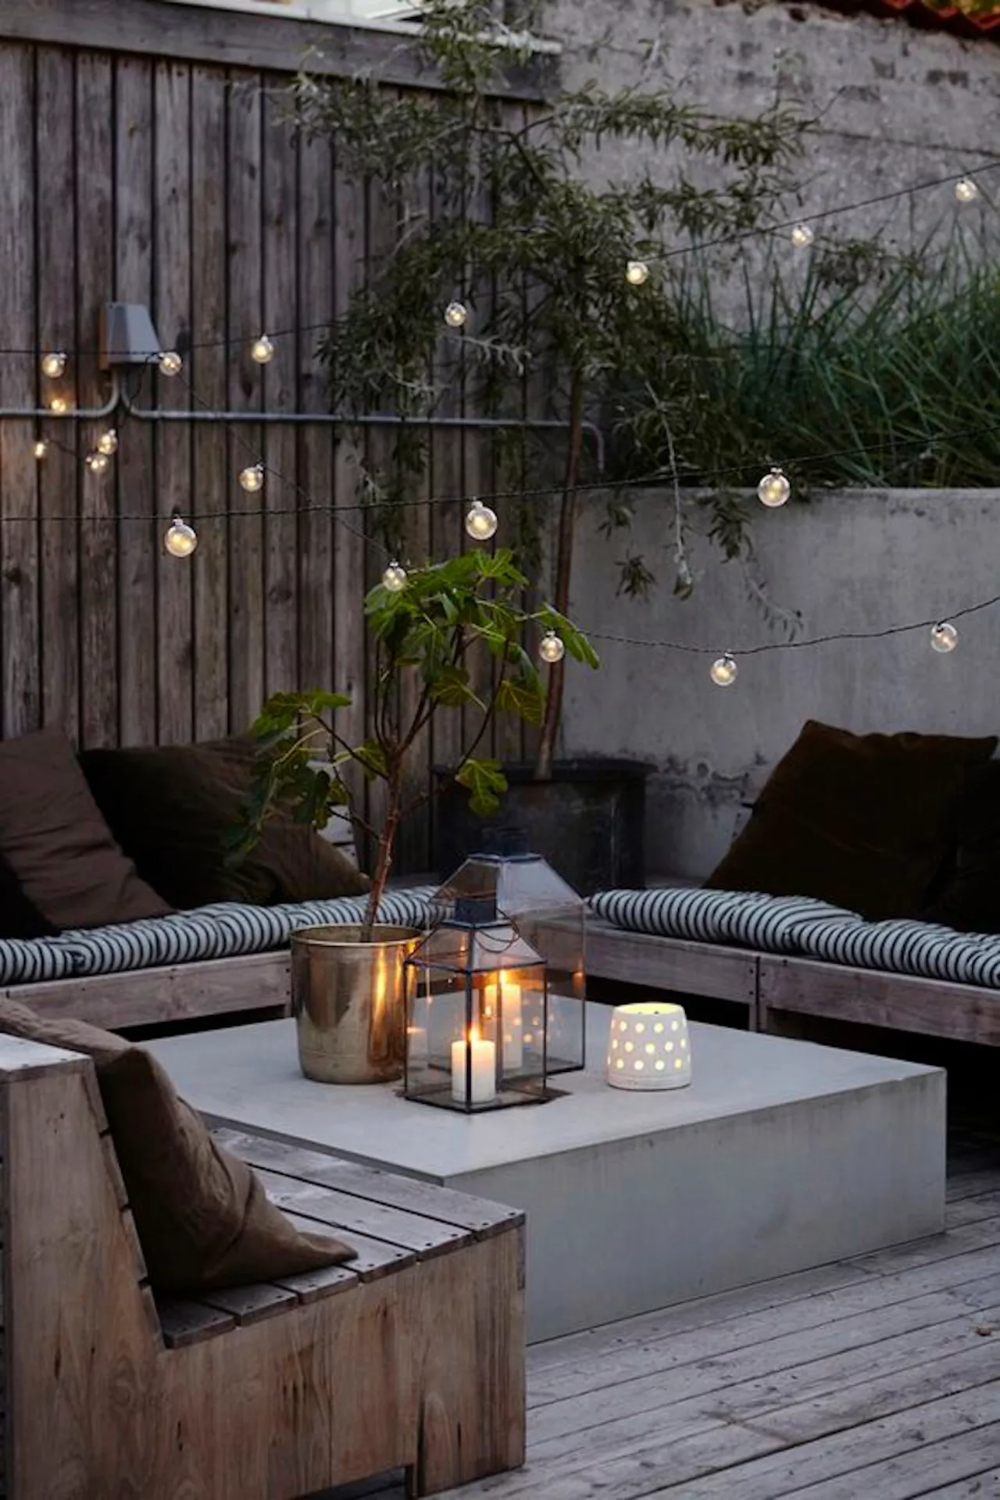 Creative Solutions for Compact Outdoor Spaces